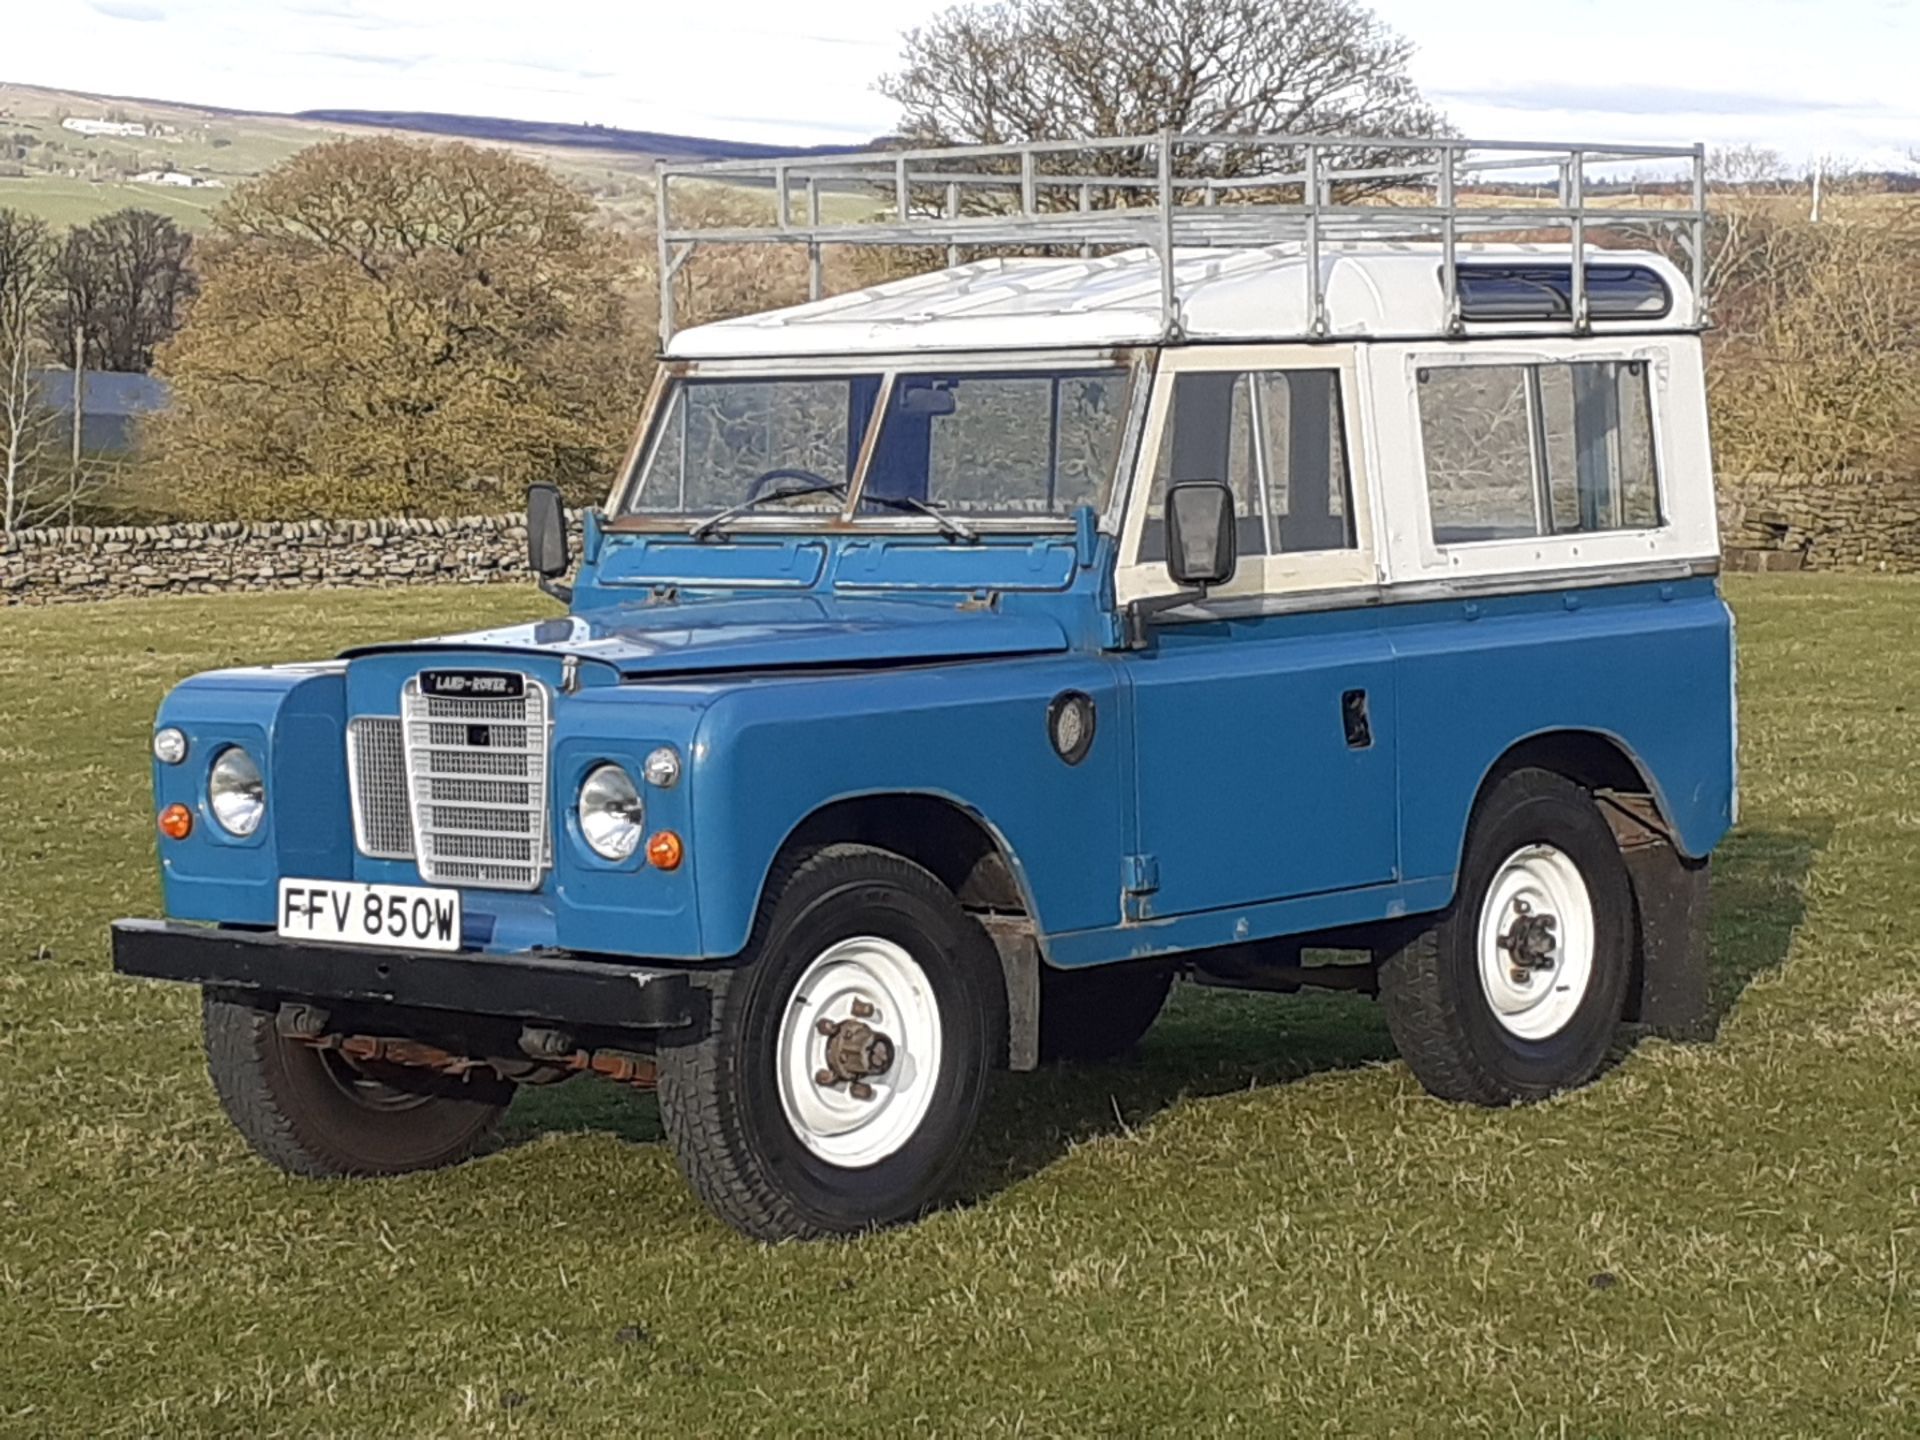 1980 LAND ROVER SERIES III CLASSIC STATION WAGON, TAX AND MOT EXEMPT *NO VAT* - Image 5 of 22